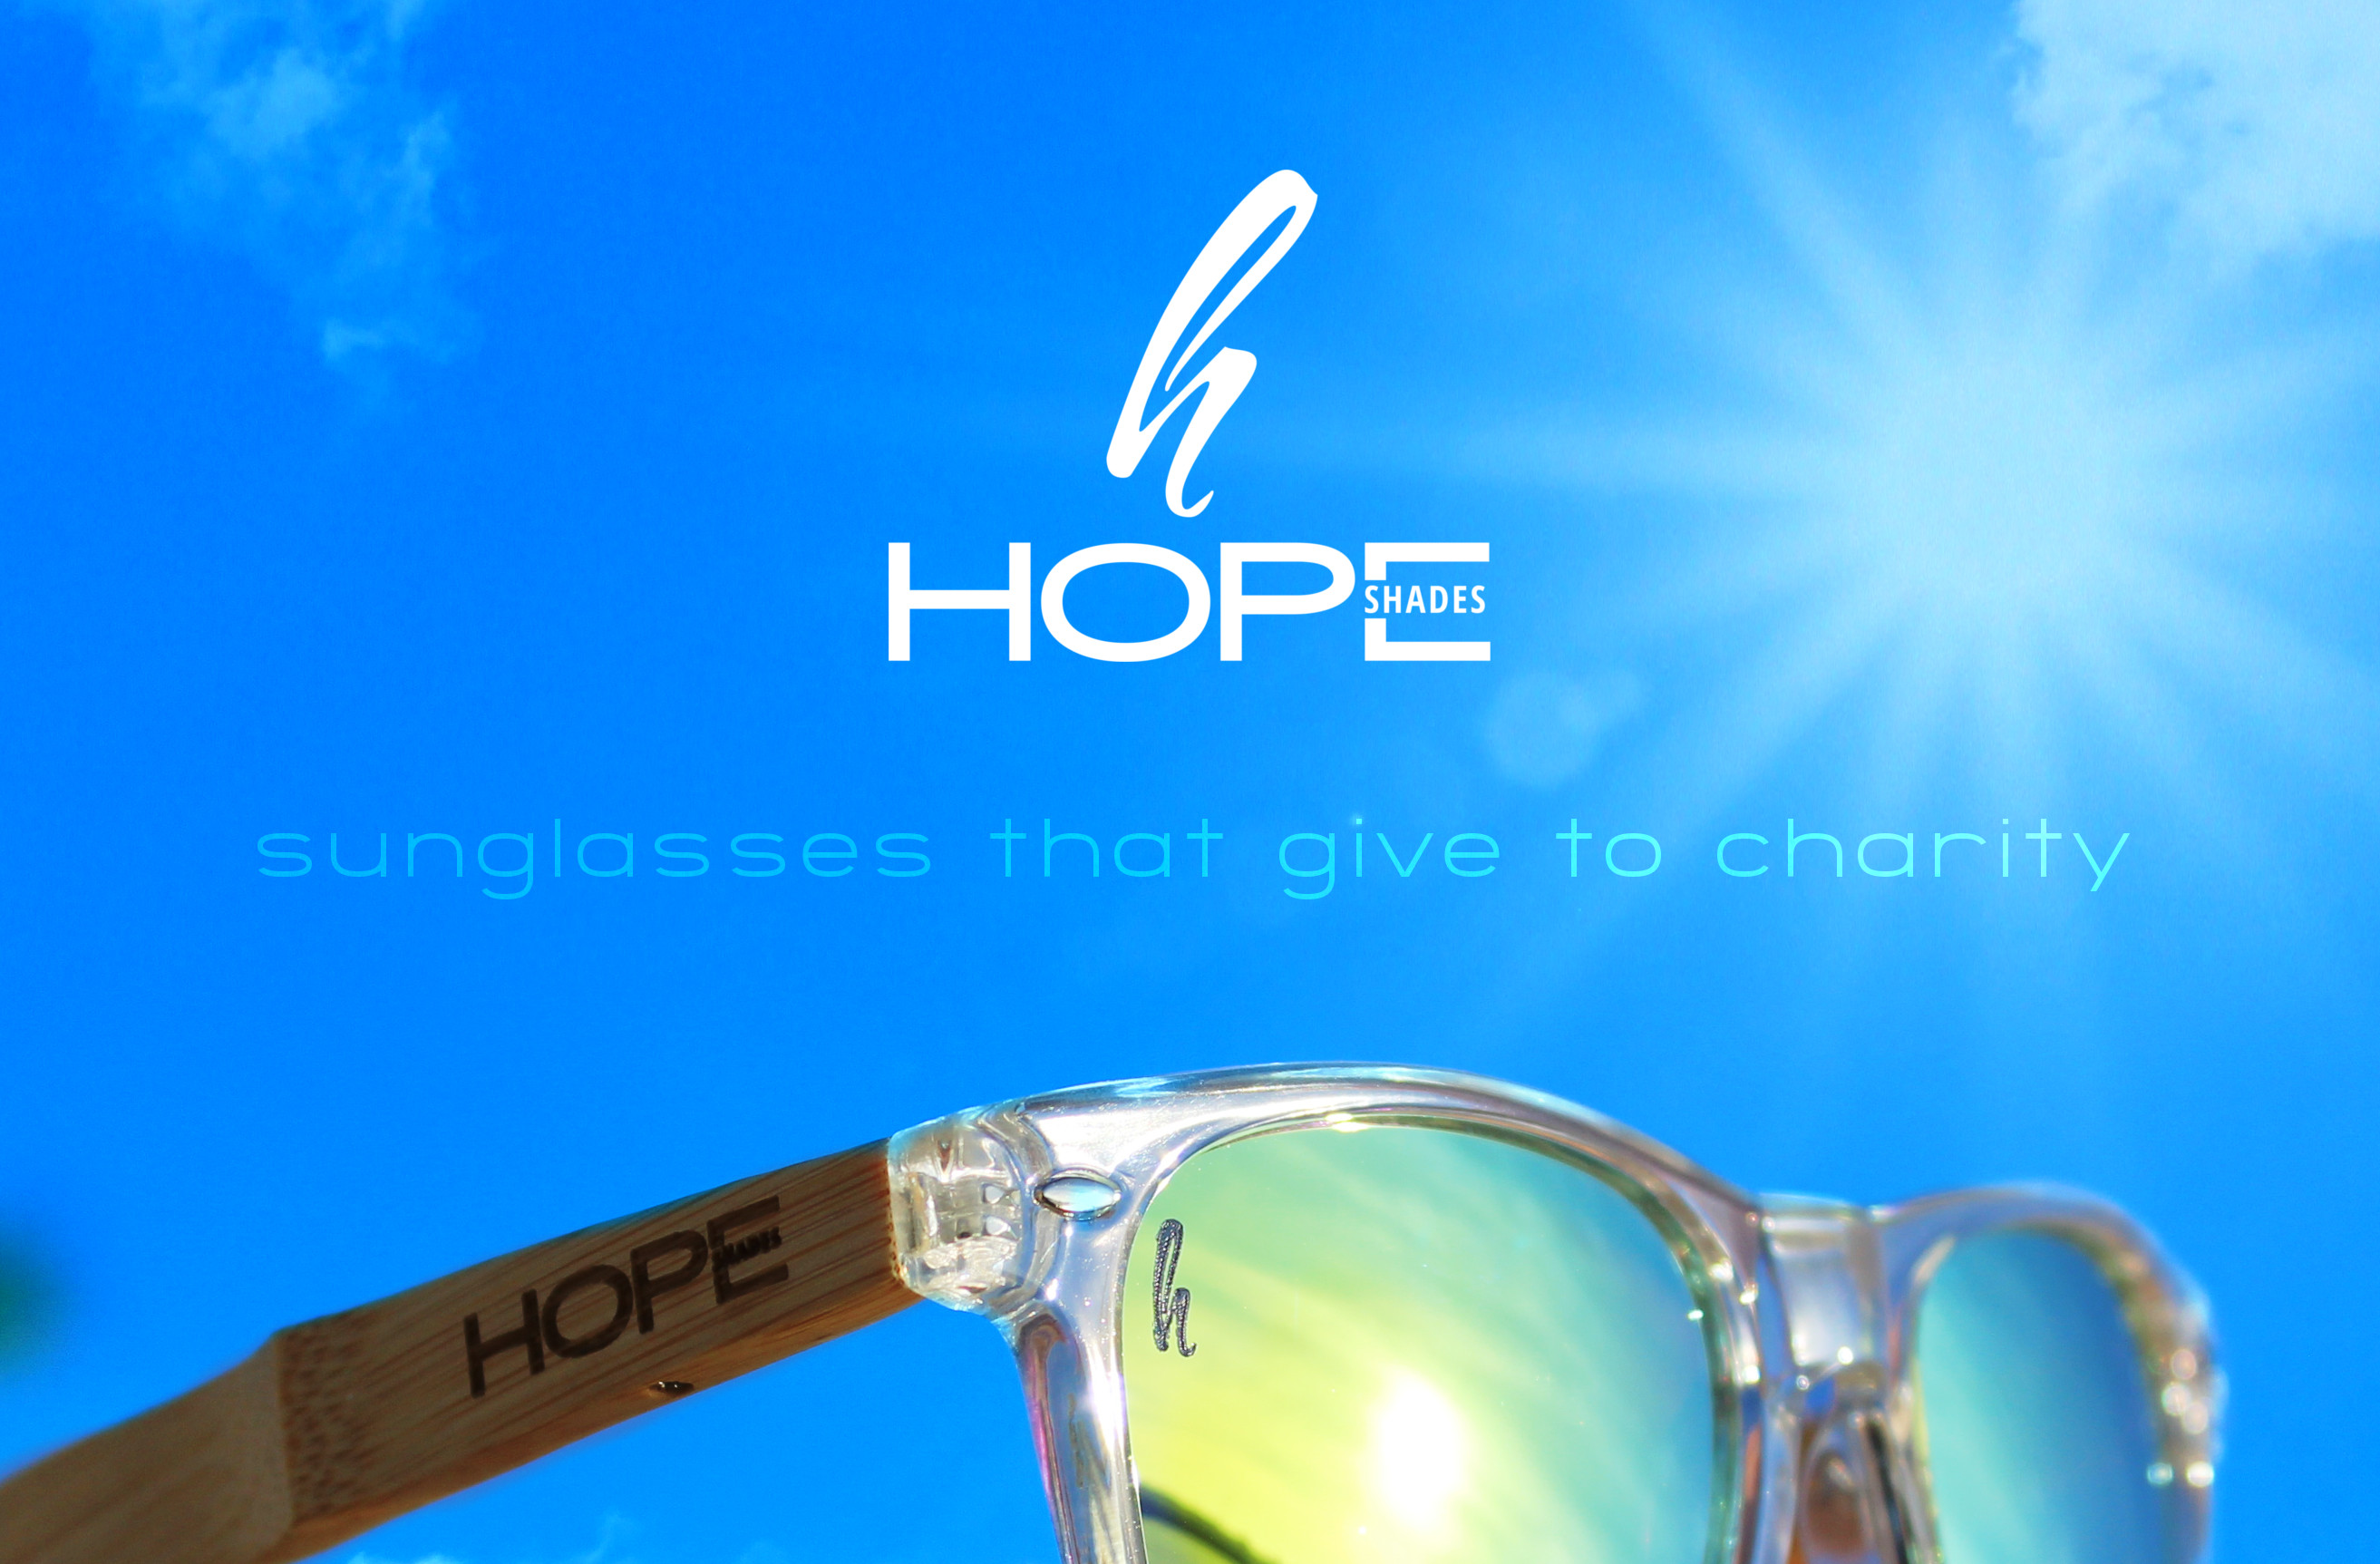 HopeShades: Sunglasses that give to charity